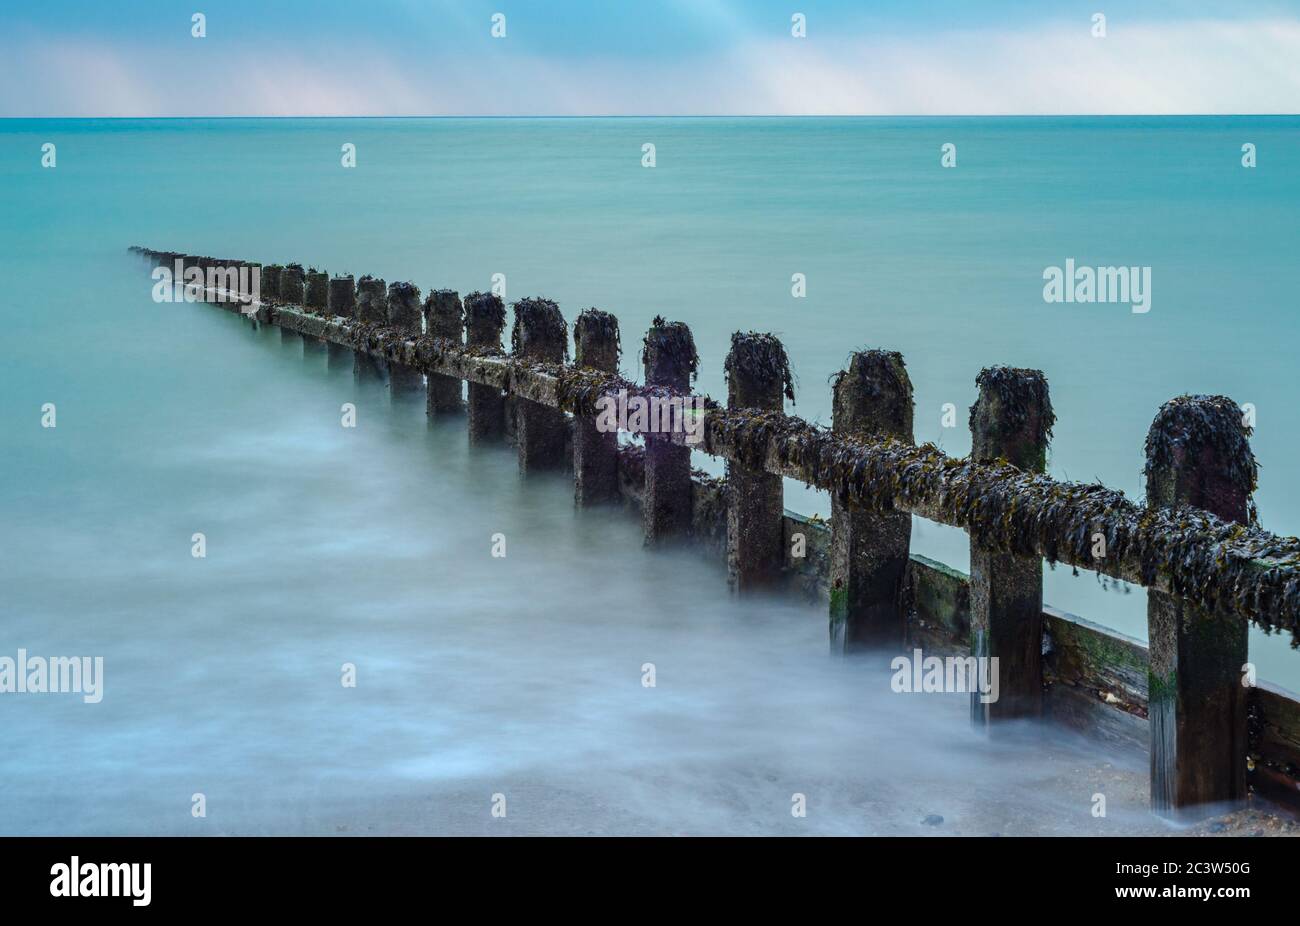 Misty effect of the sea surrounding a groyne on a beach at high tide. Stock Photo